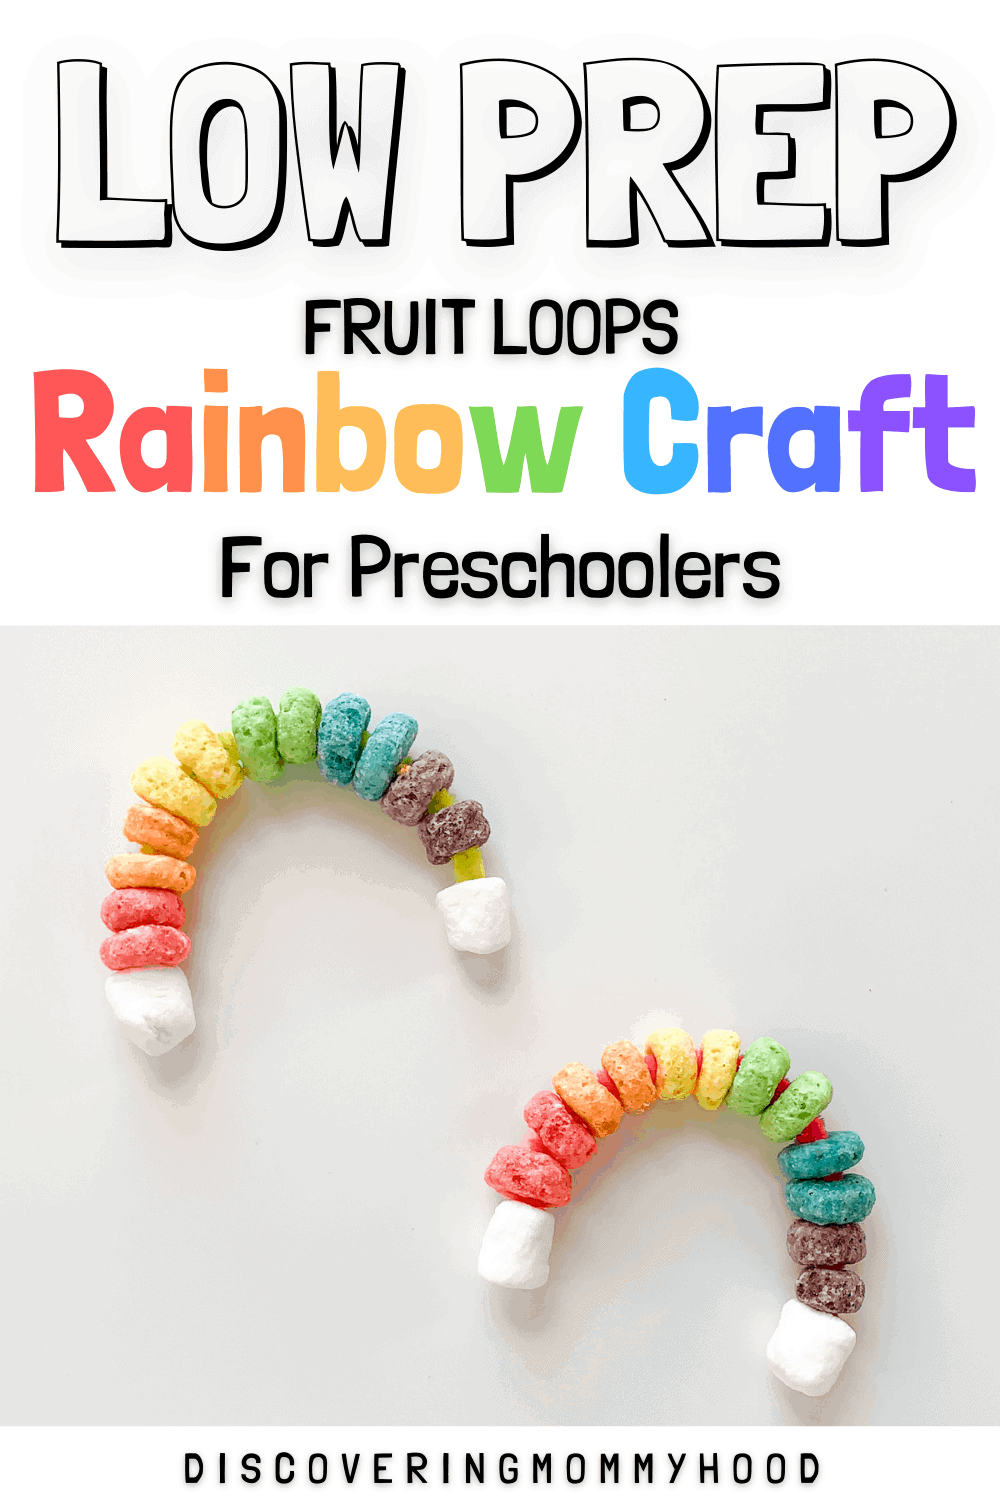 fruit-loops-rainbow-craft-for-preschoolers-discovering-mommyhood